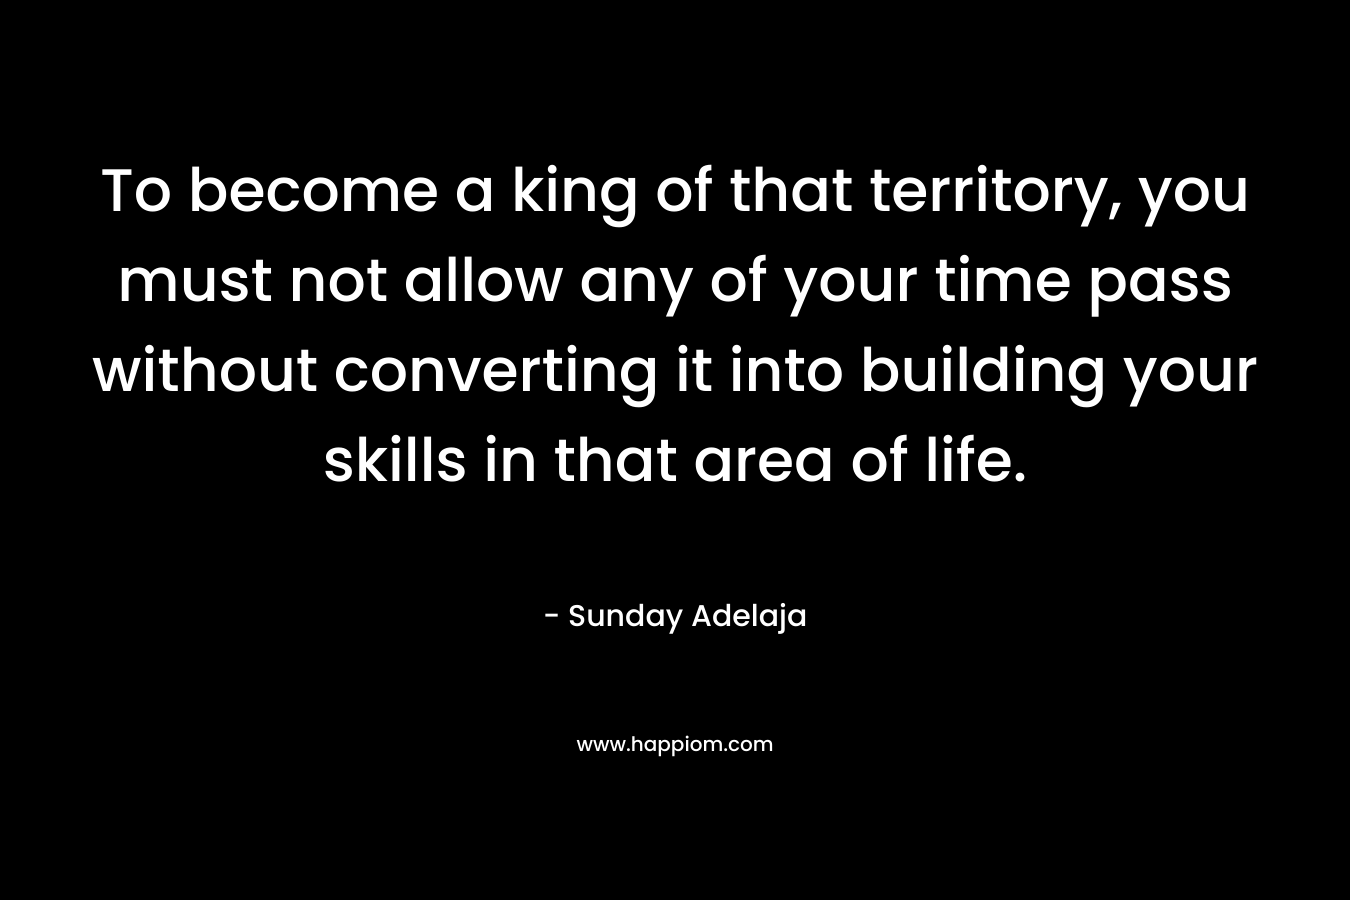 To become a king of that territory, you must not allow any of your time pass without converting it into building your skills in that area of life.